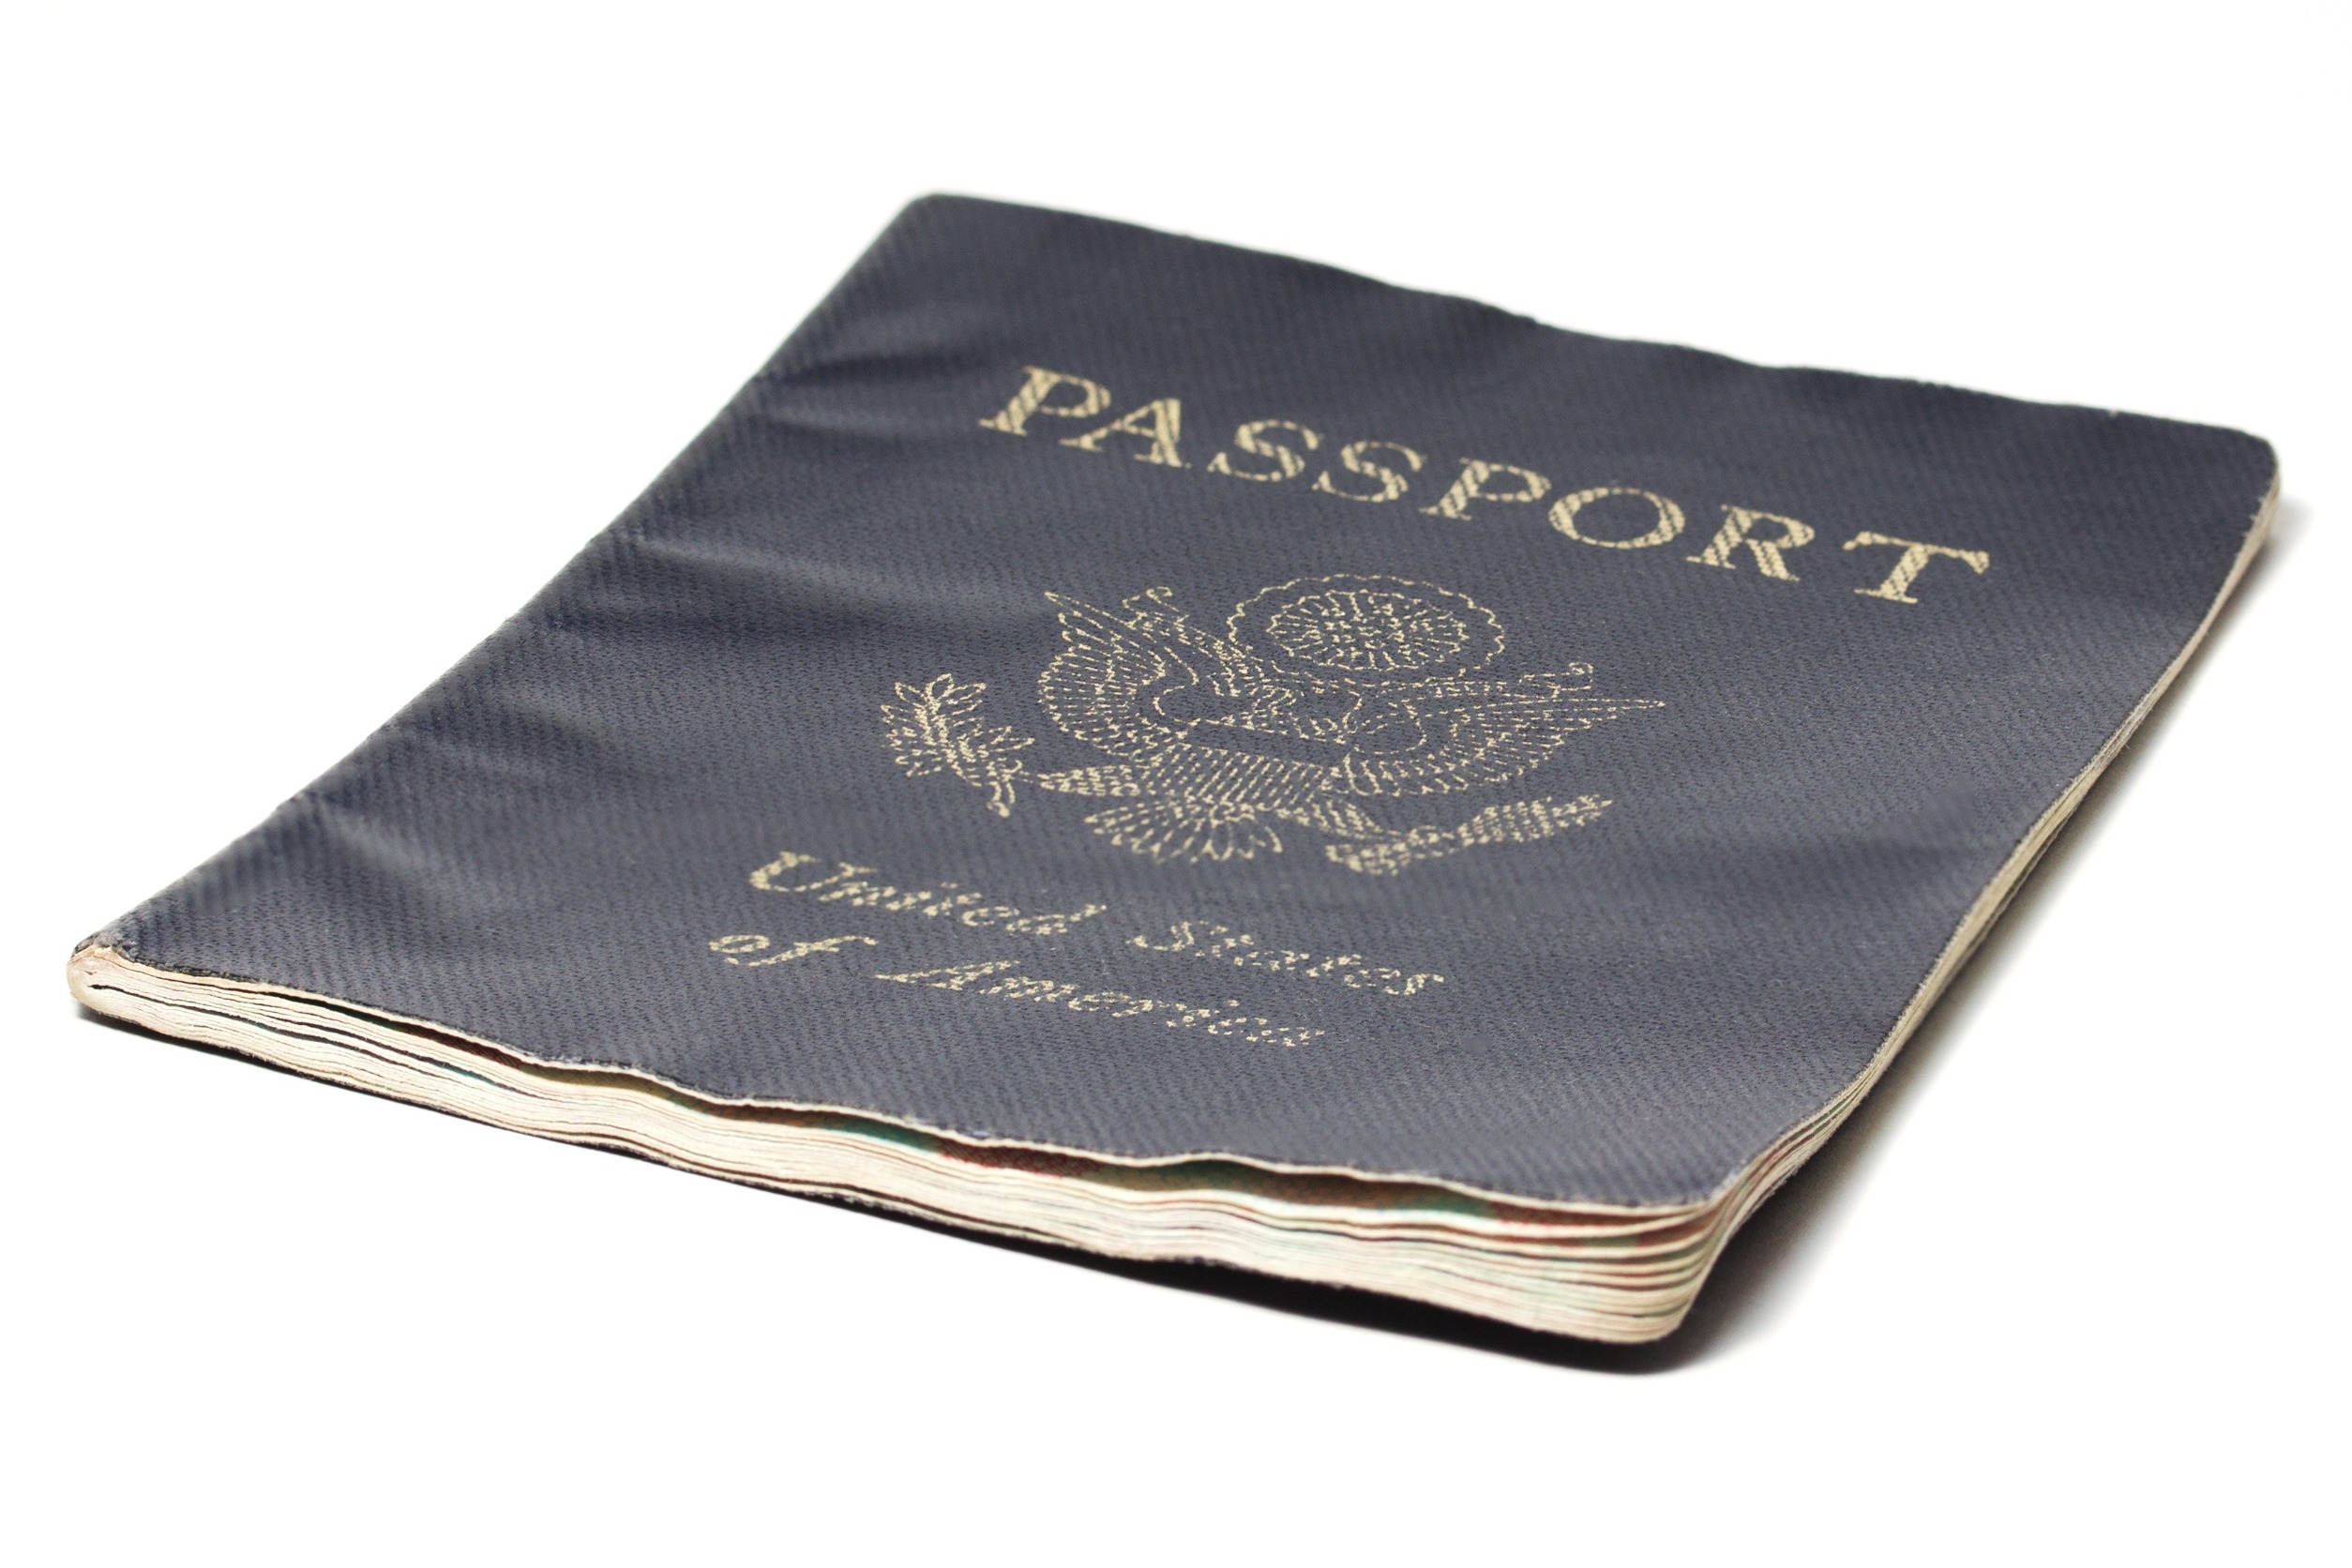 Passport Damaged? Don't Panic! Fix It (or Get a New One) FAST